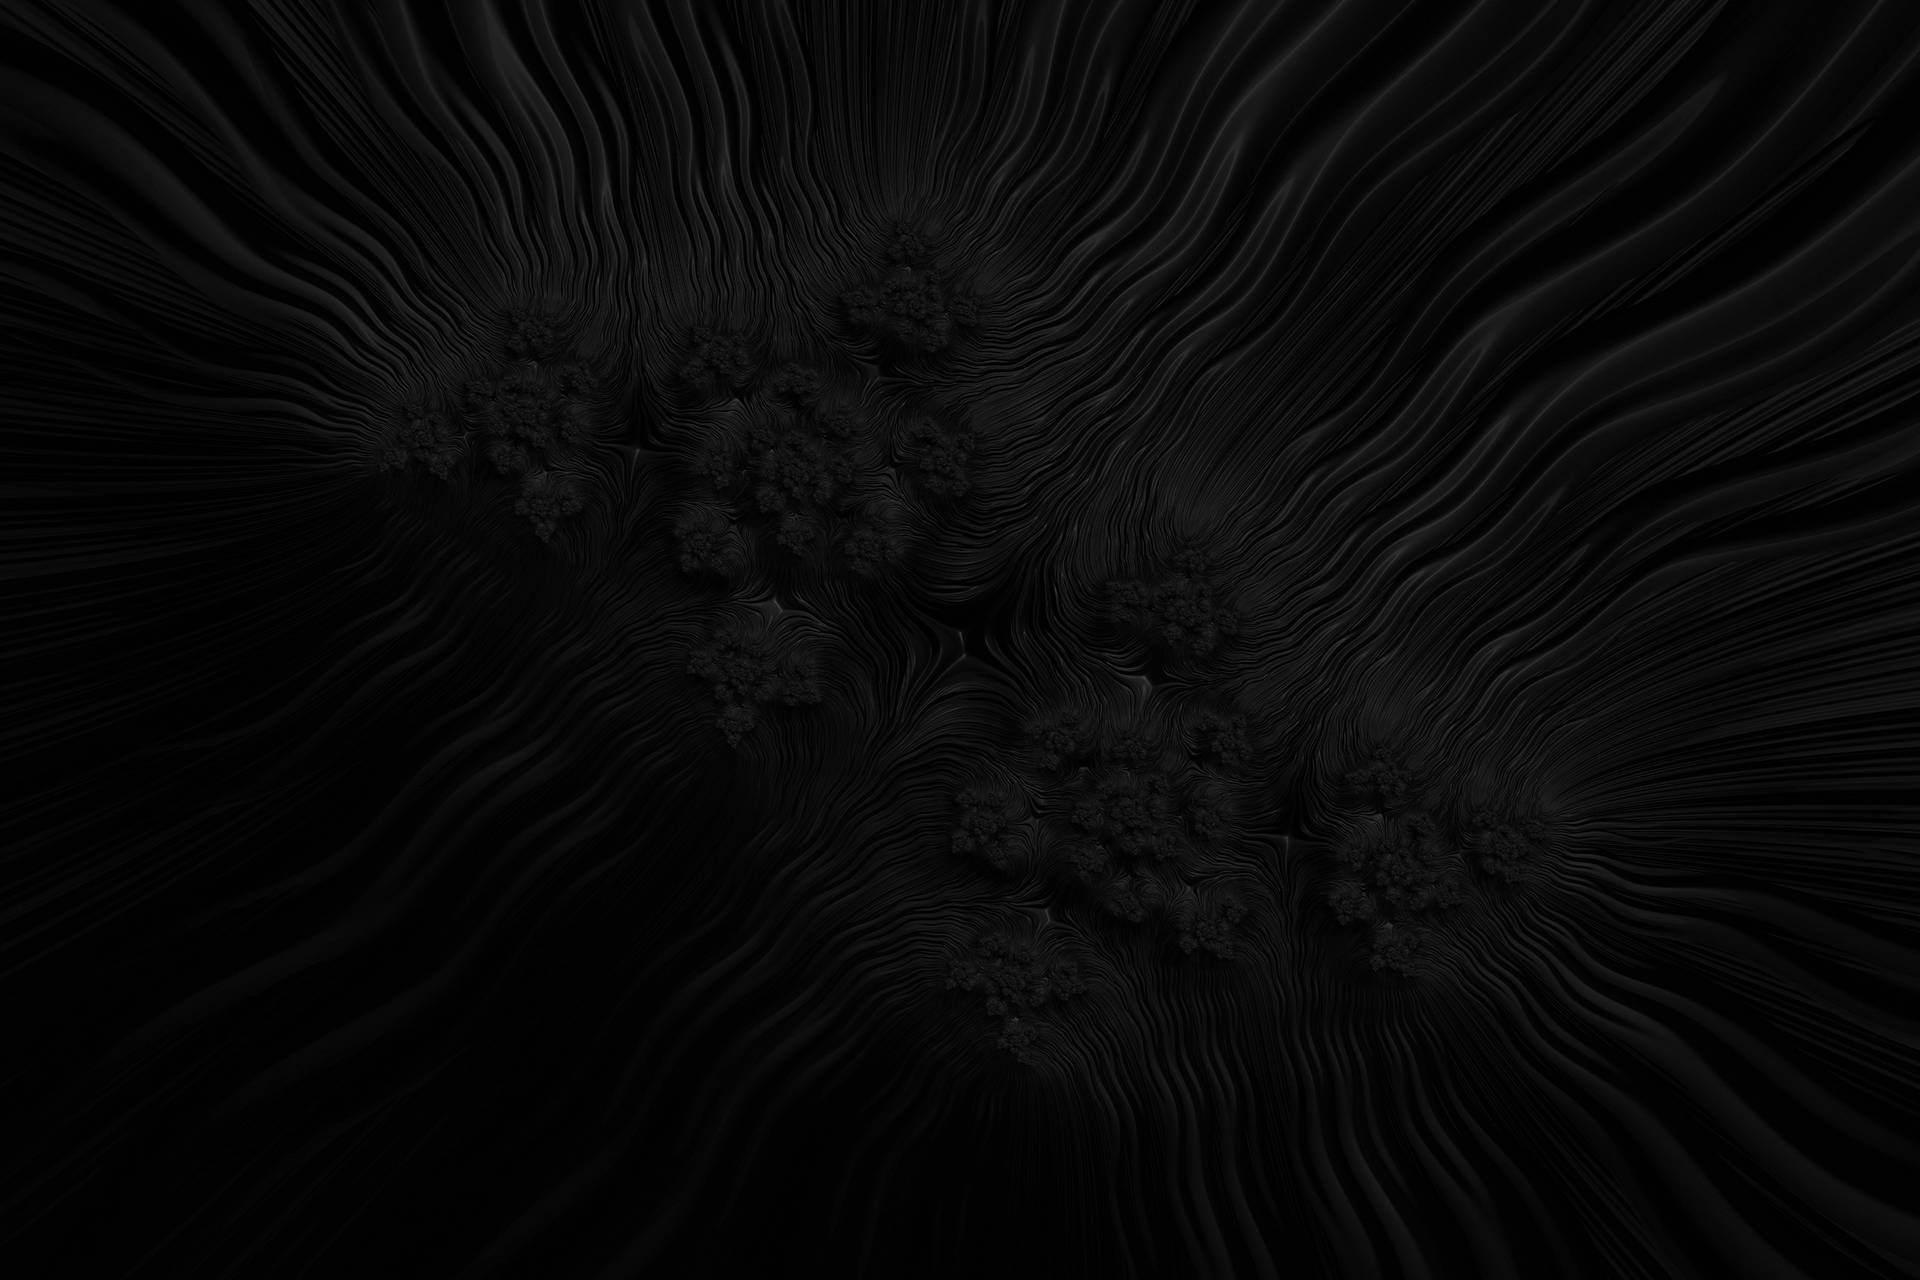 Ominous All-Black Textured Abstract Art Wallpaper